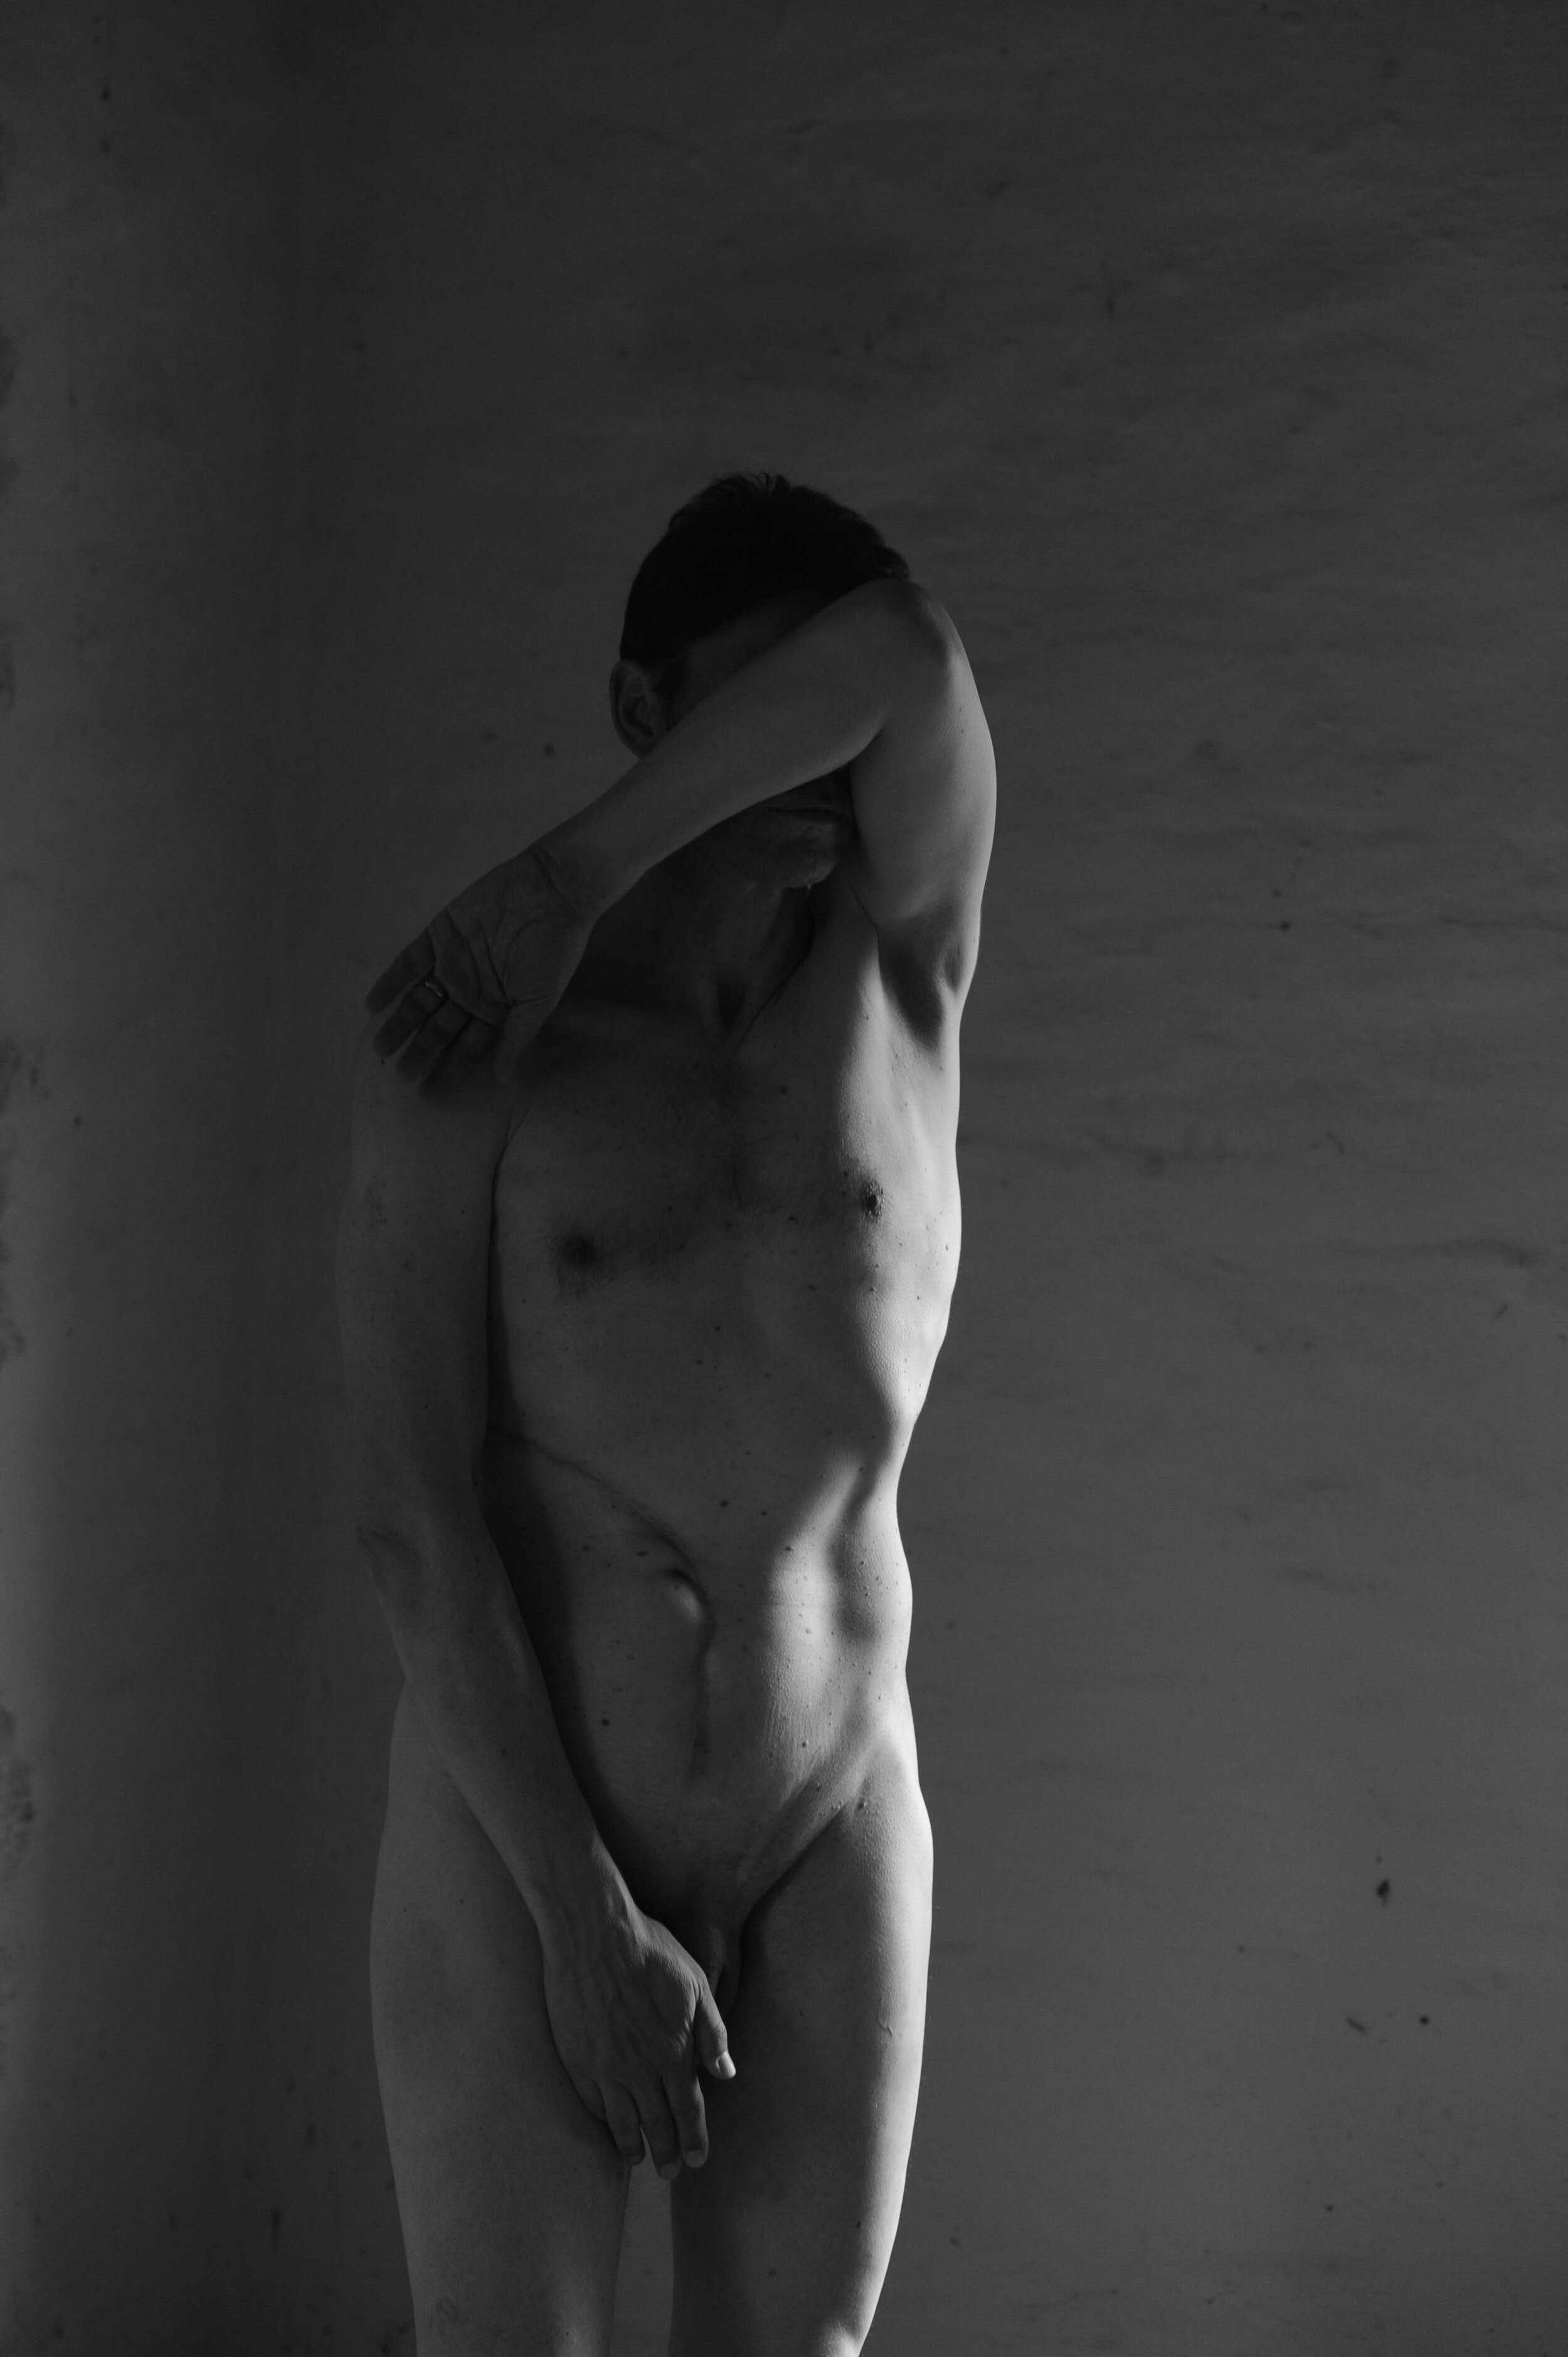 Exquisite masculinity: Indulge in the beauty of vintage male nudes